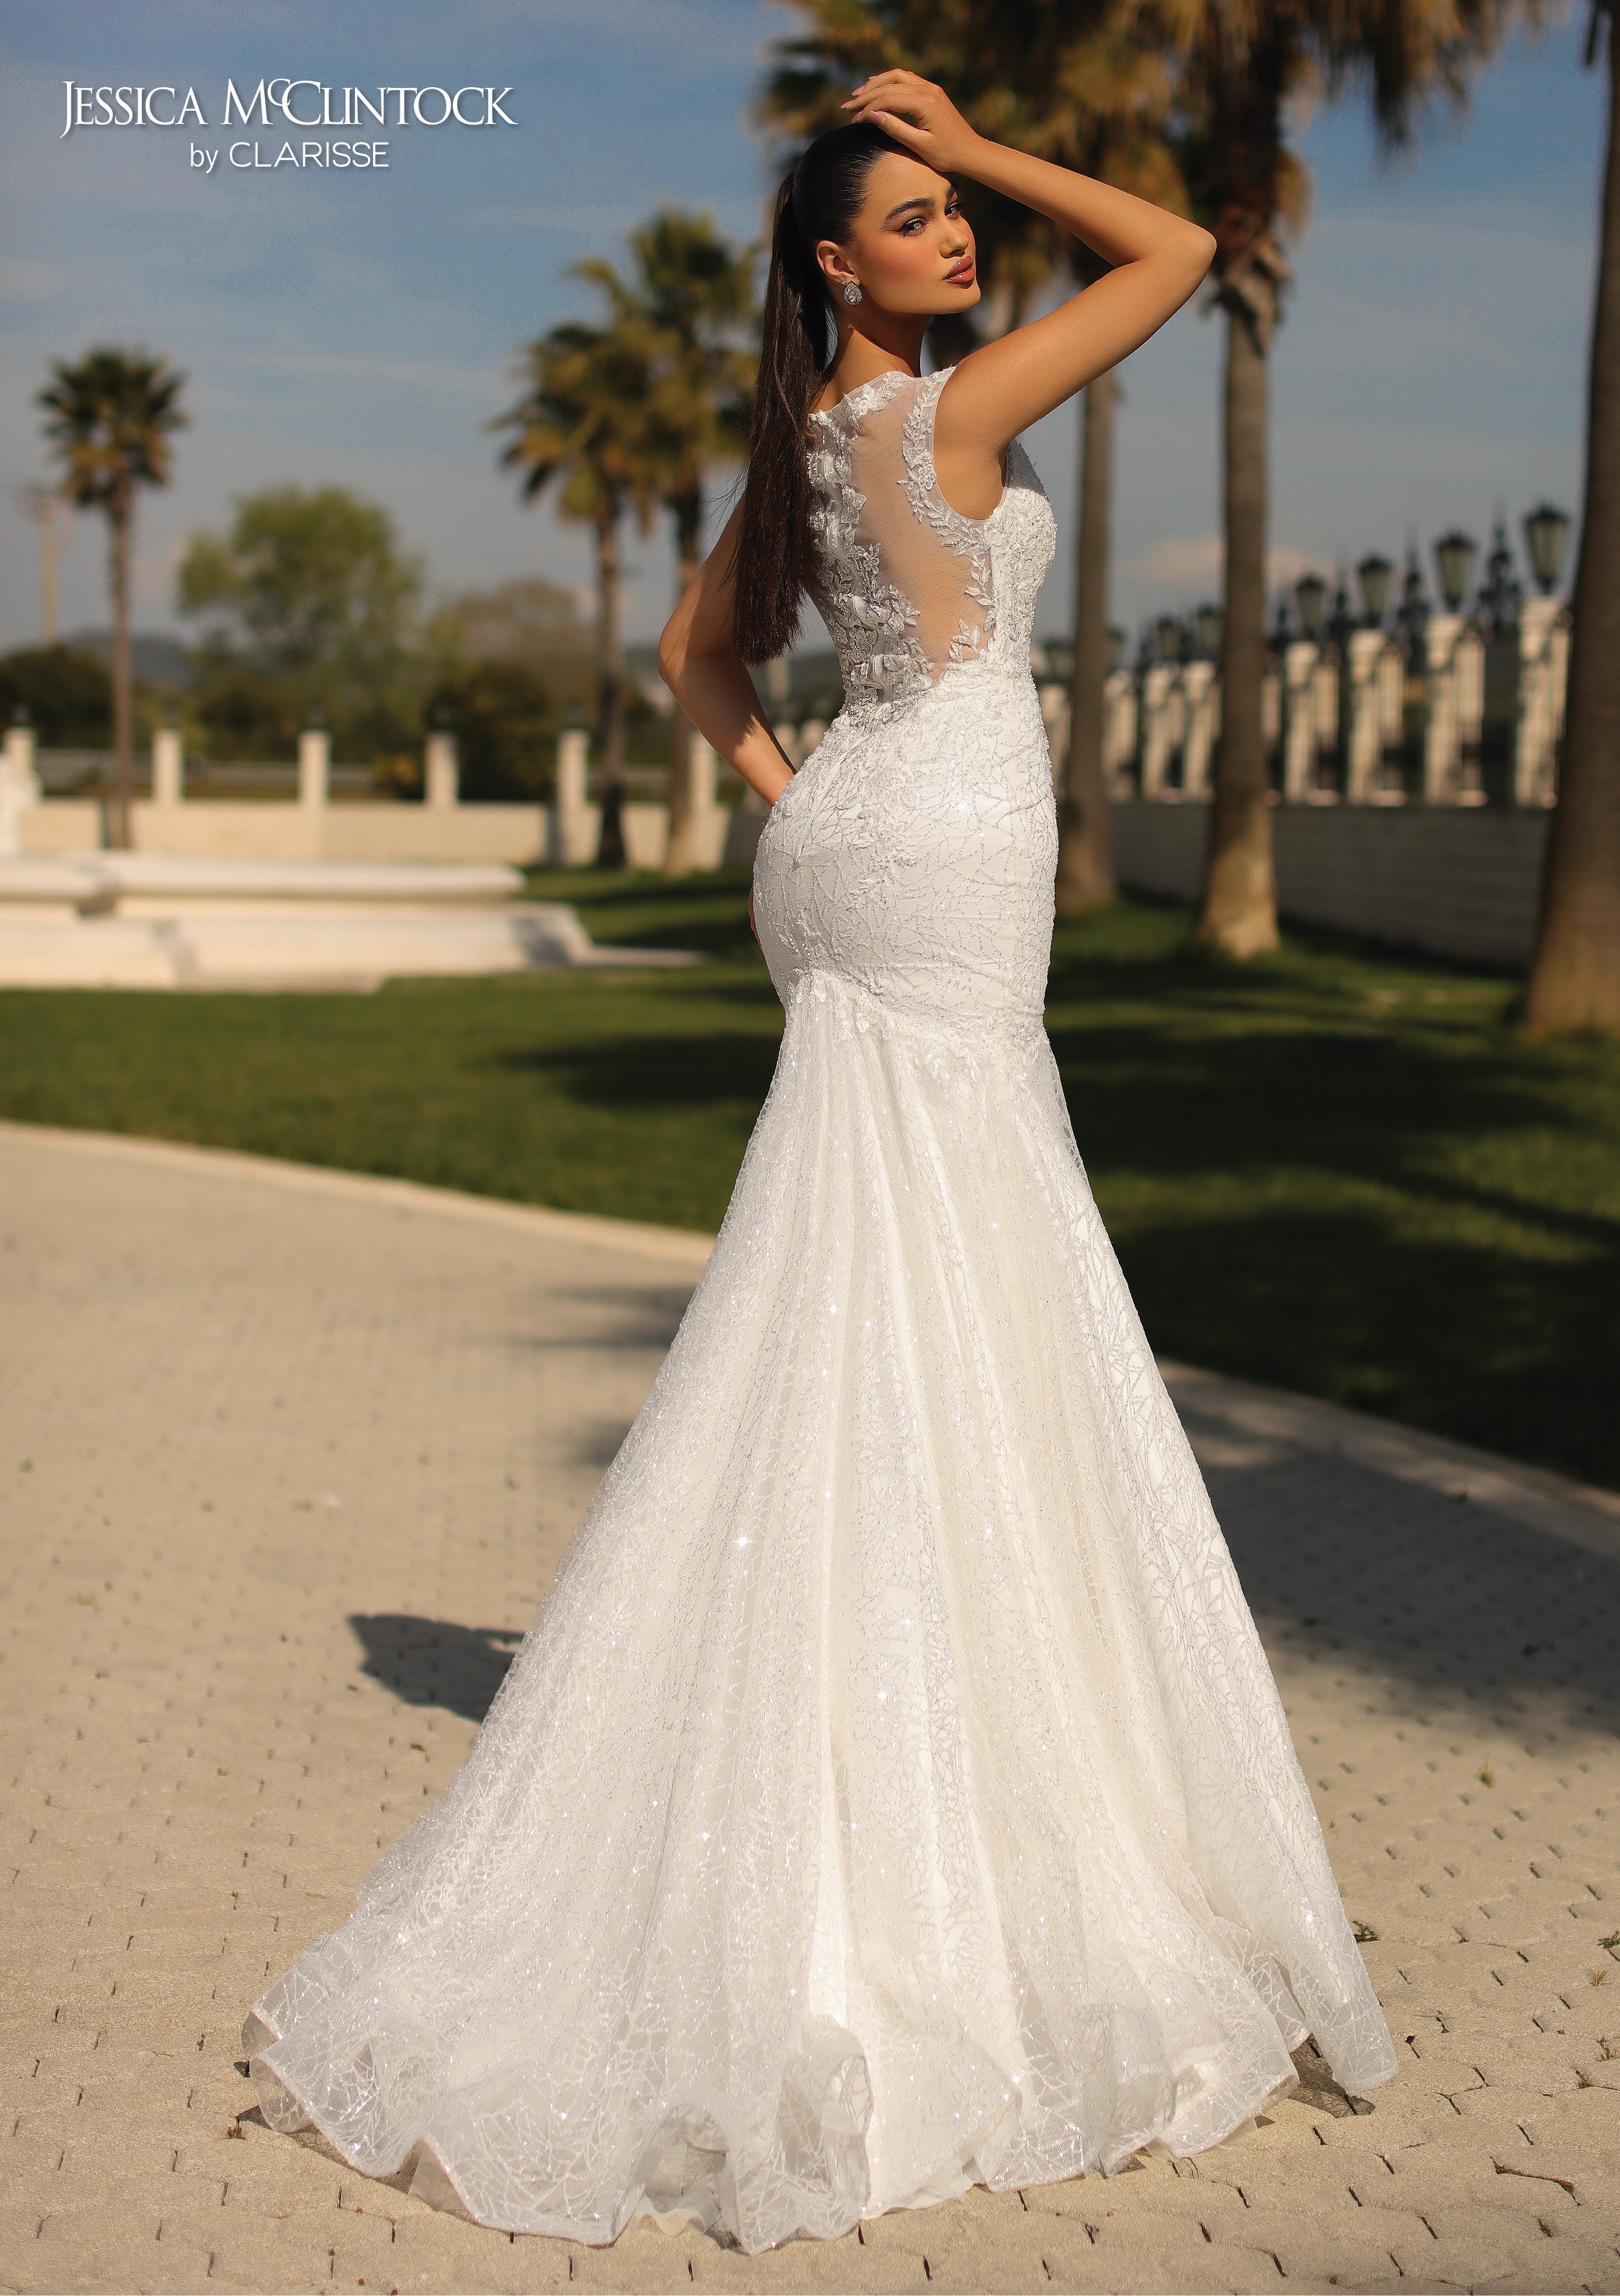 Stunning White Wedding Dress with a Sheer back featuring lace applique and mermaid train. 